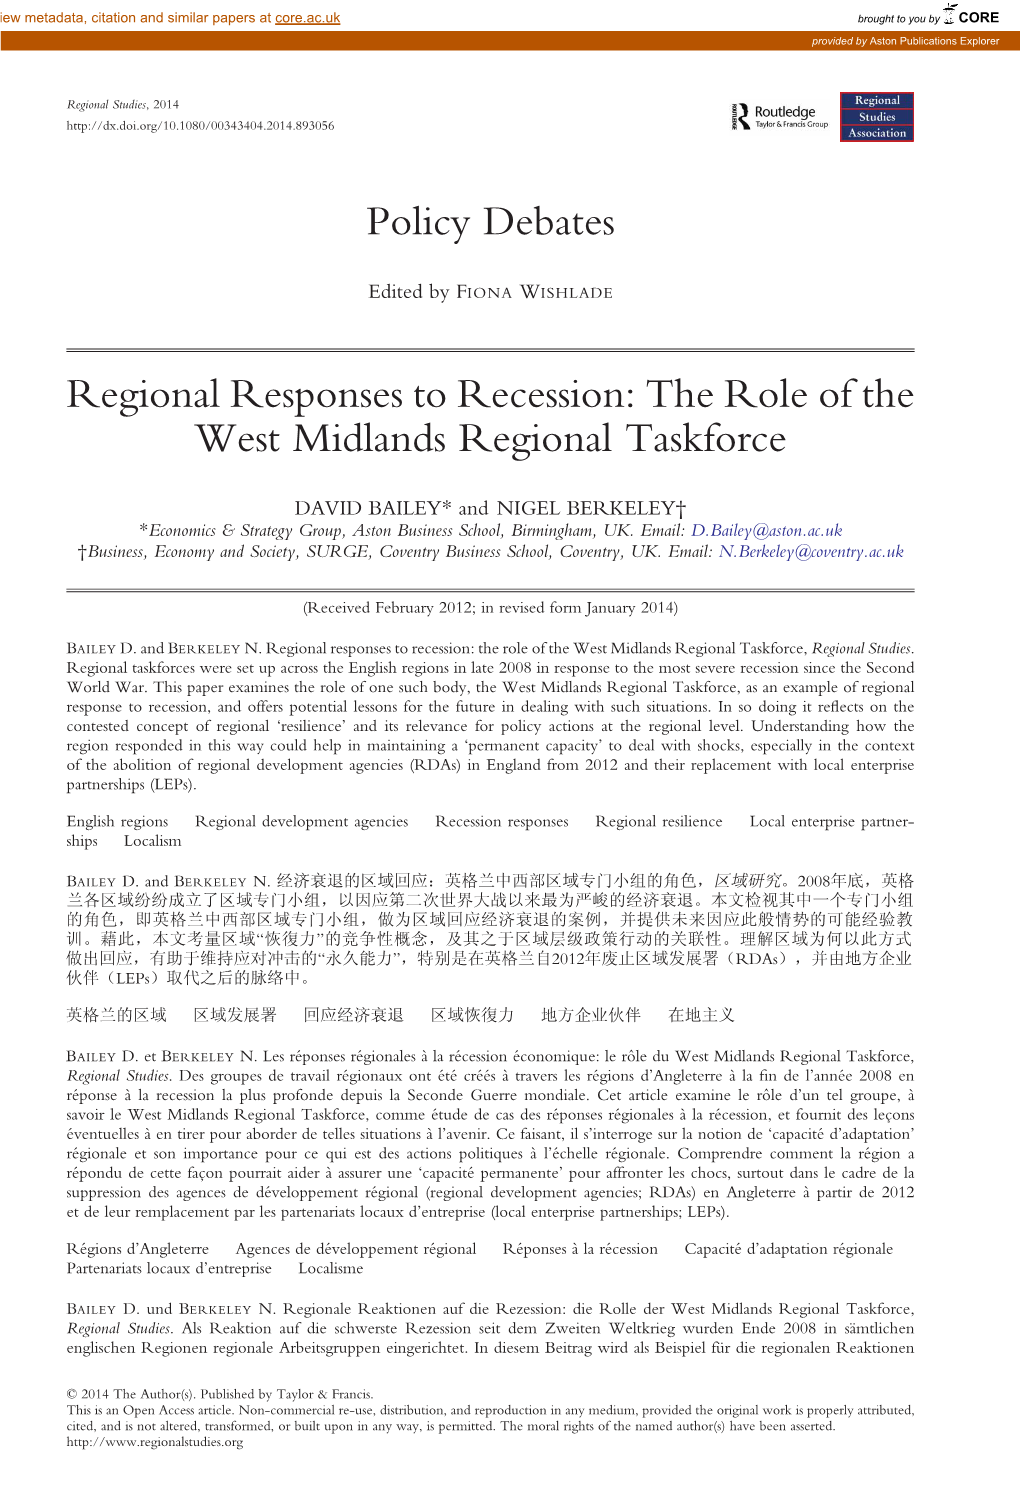 Regional Responses to Recession: the Role of the West Midlands Regional Taskforce